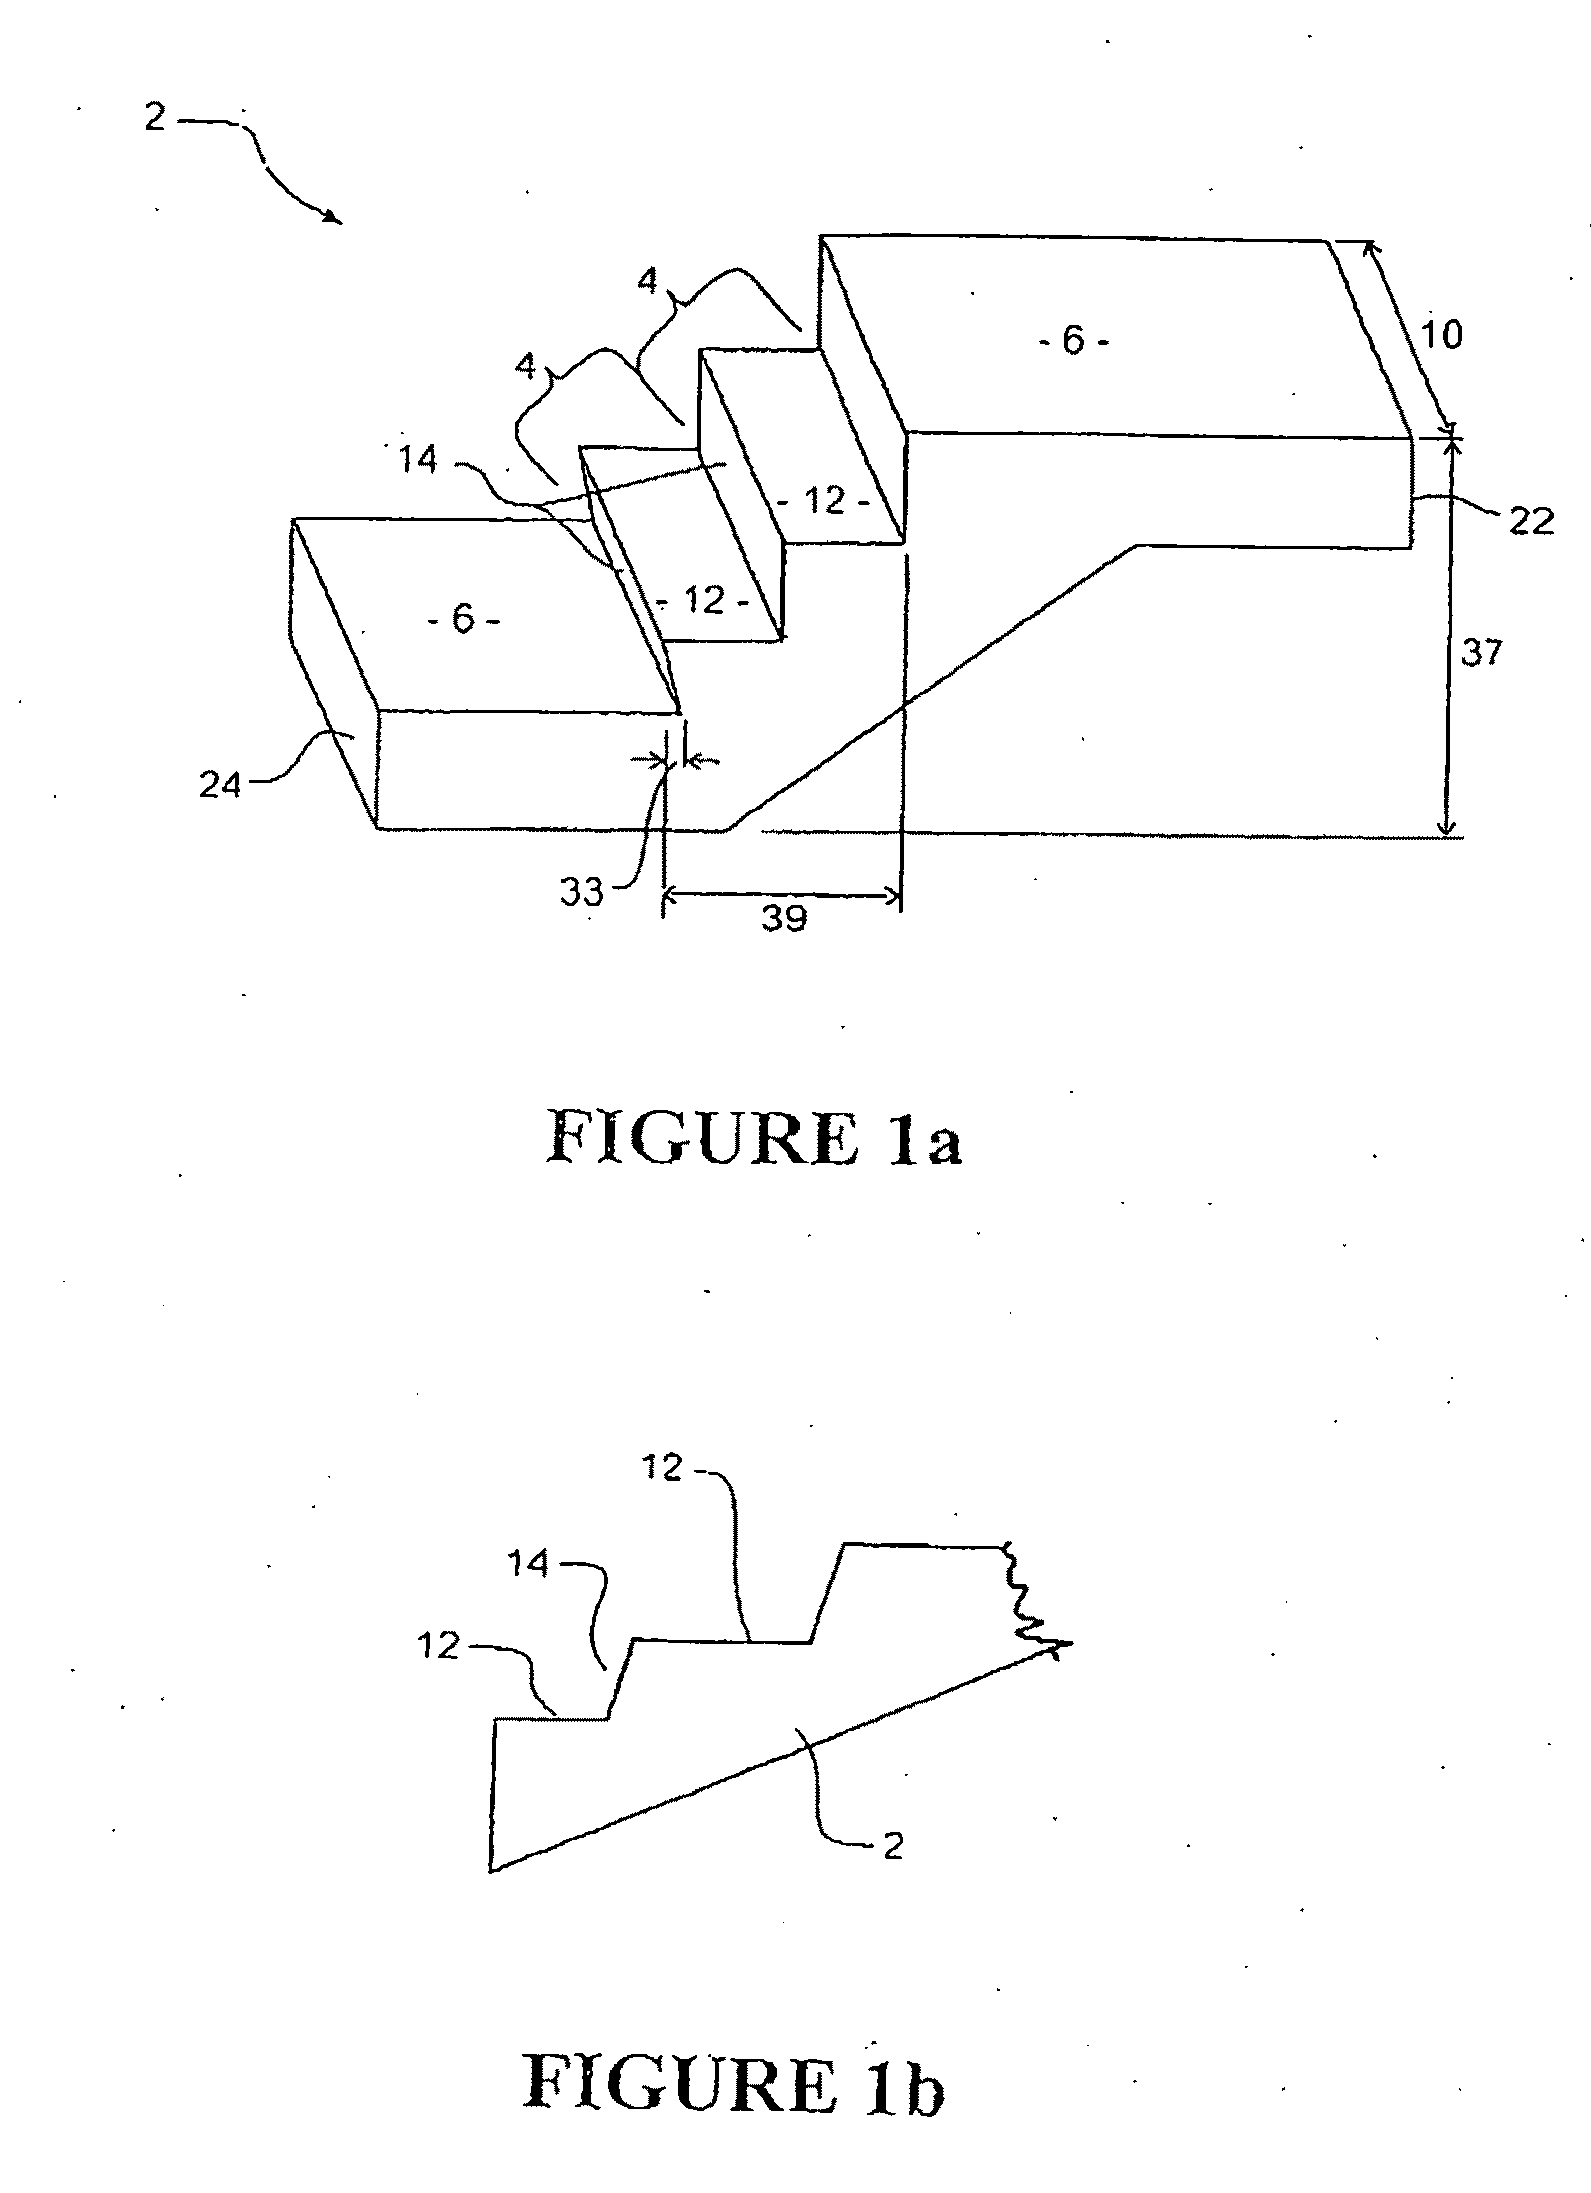 Stair forming apparatus and related methods